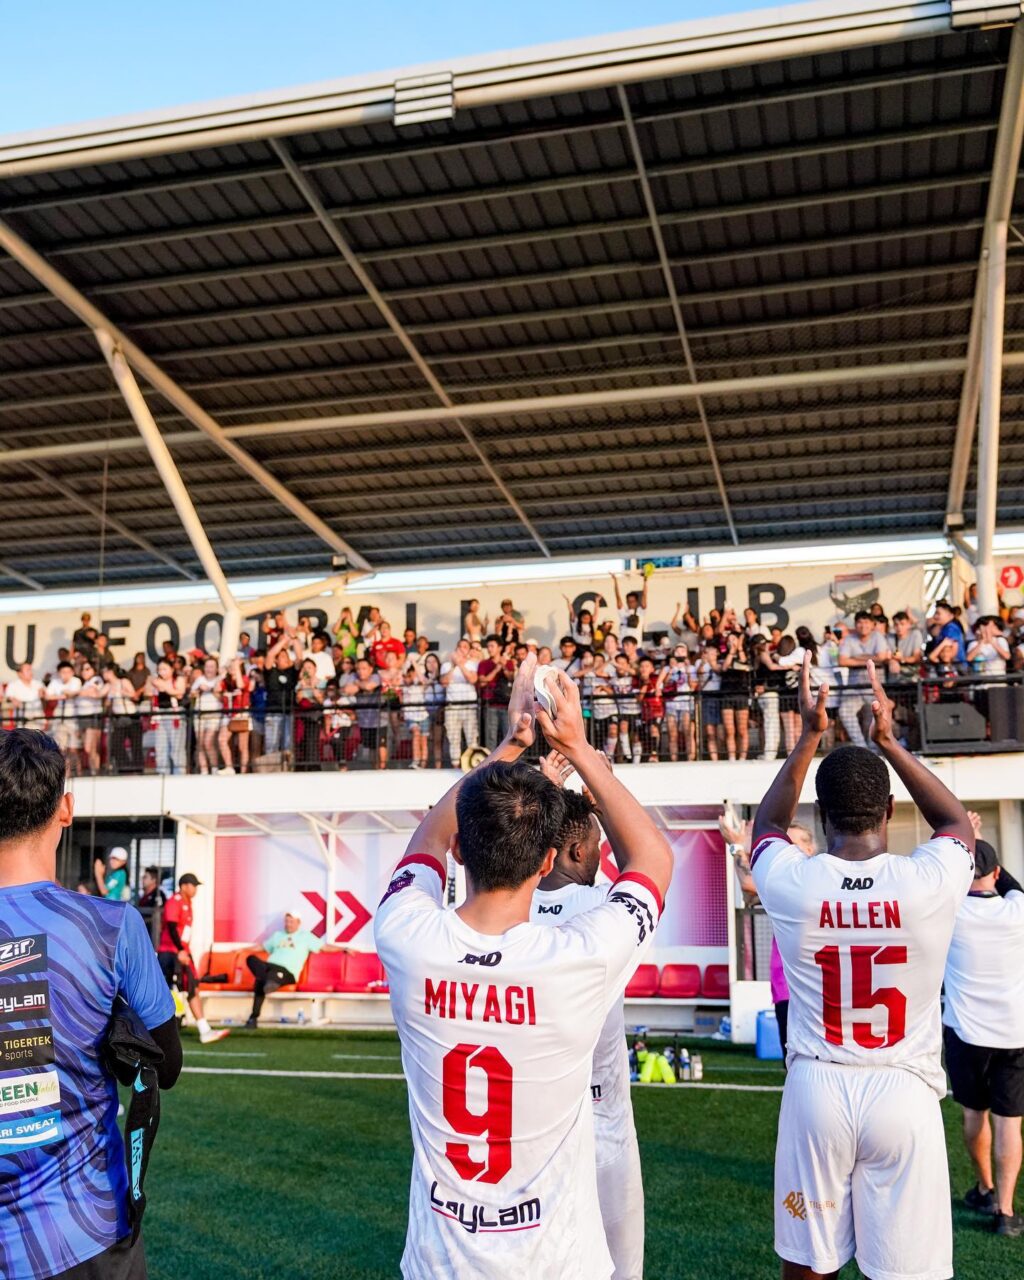 Cebu FC players applauding Cebuano football fans during one of their home matches at the Dynamic Herb-Borromeo Sports Complex.